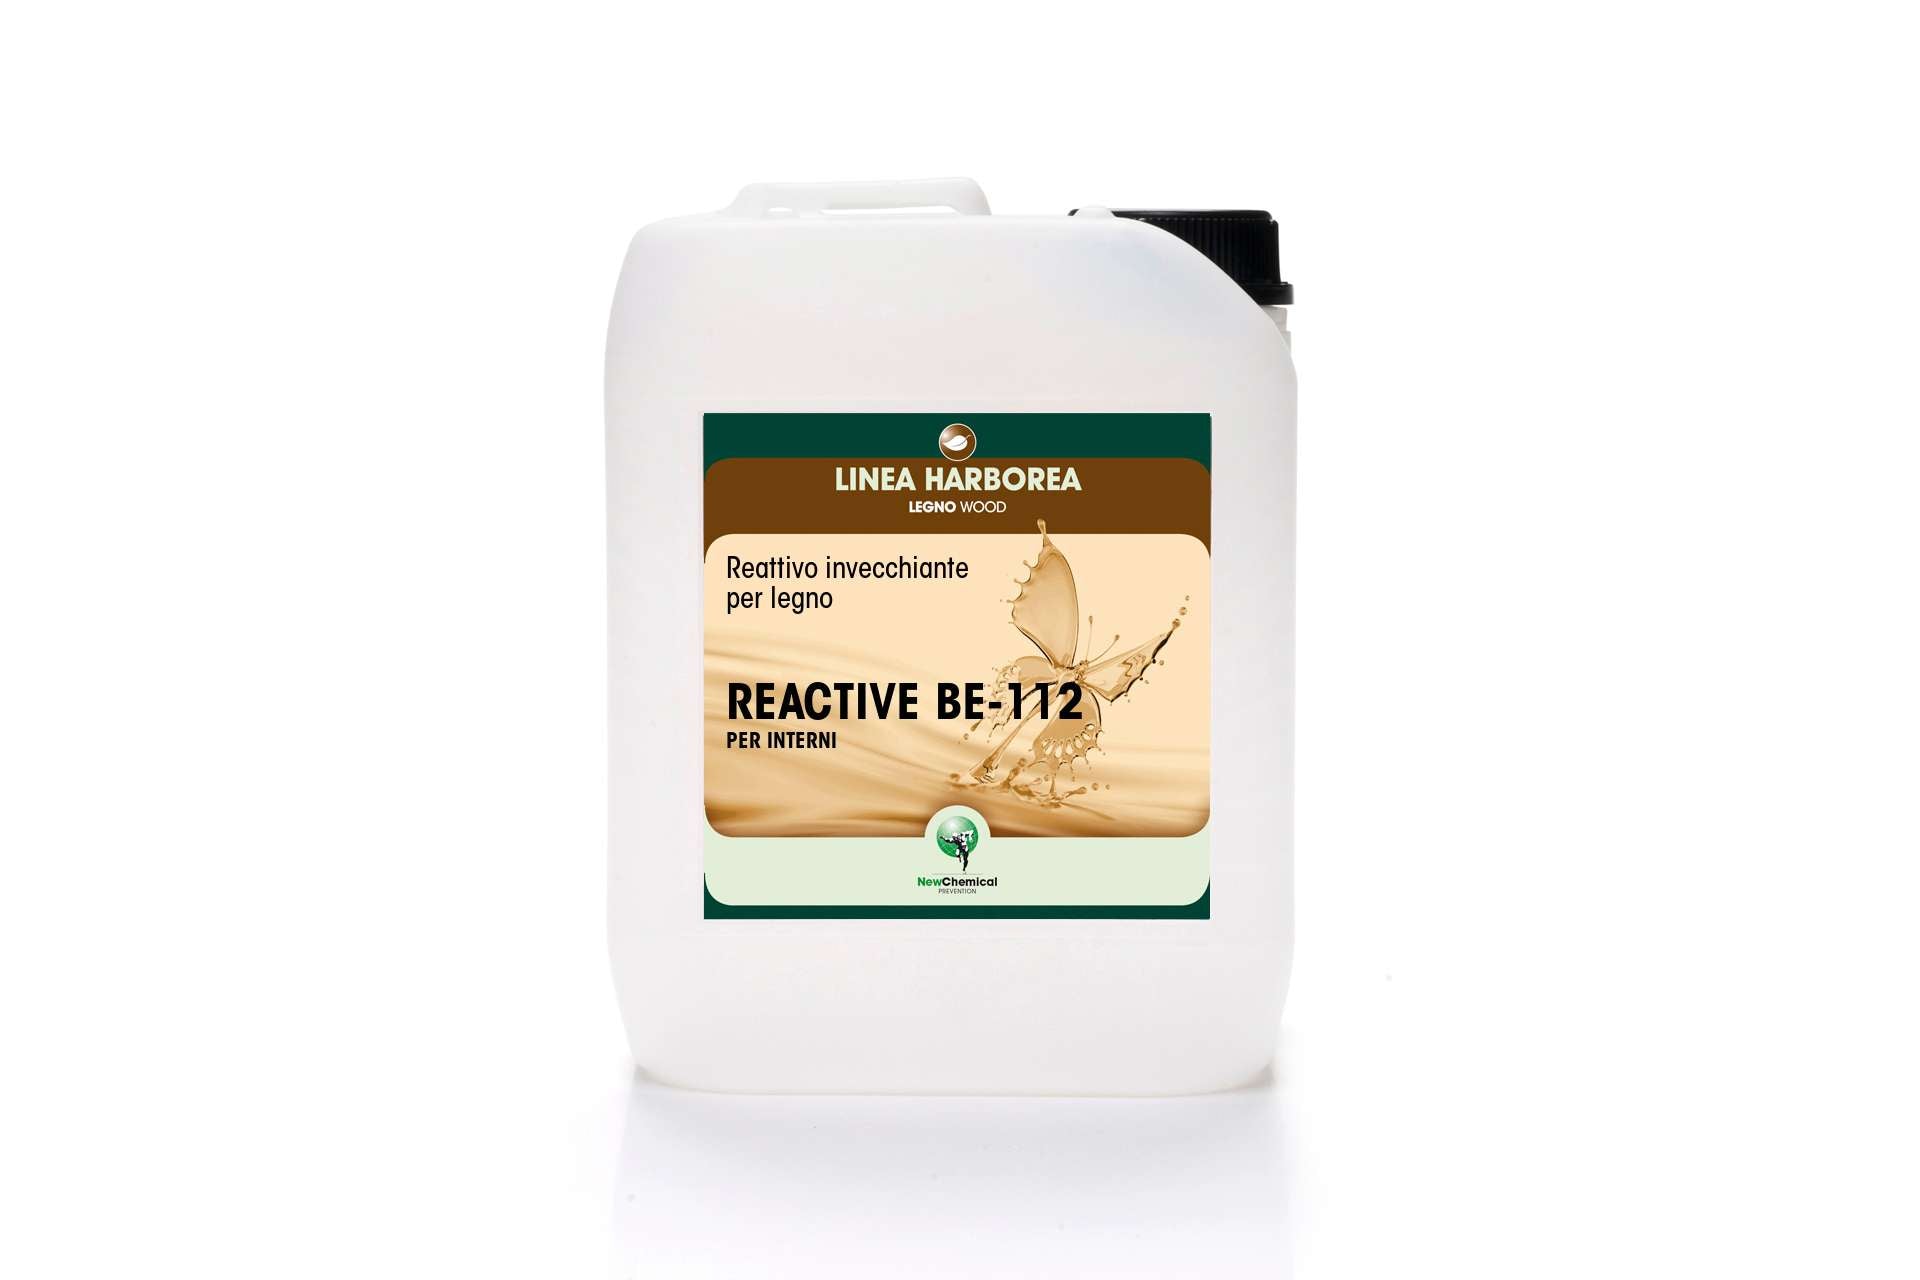 Reactive BE-112